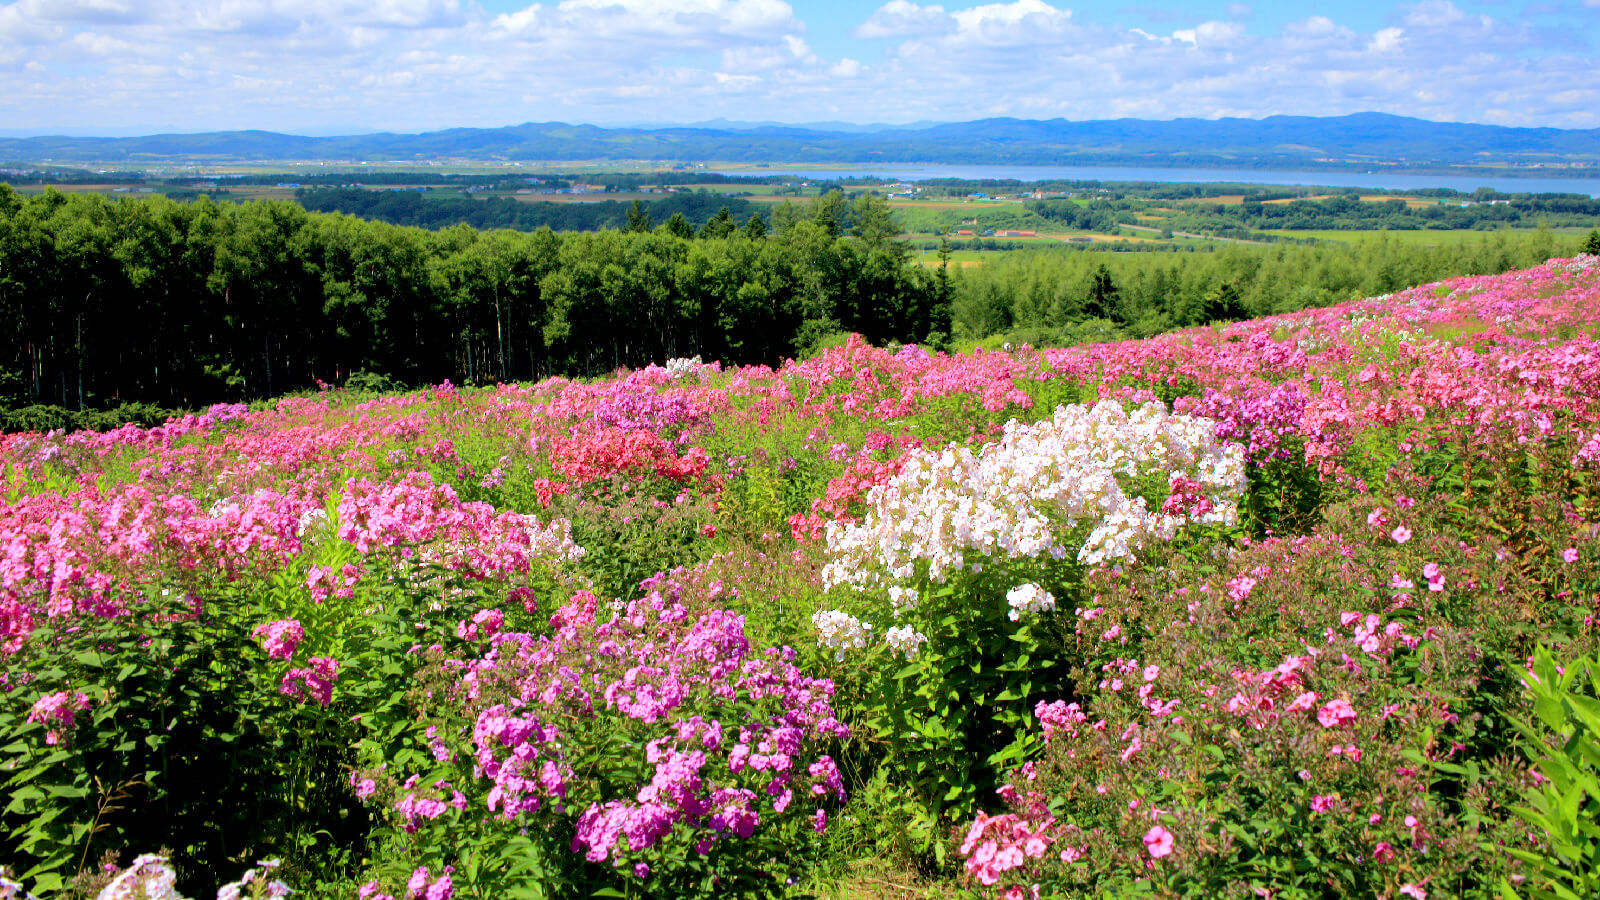 Enjoy the Pinks, Reds, and Purples of Summer at Abashiri Phlox Park